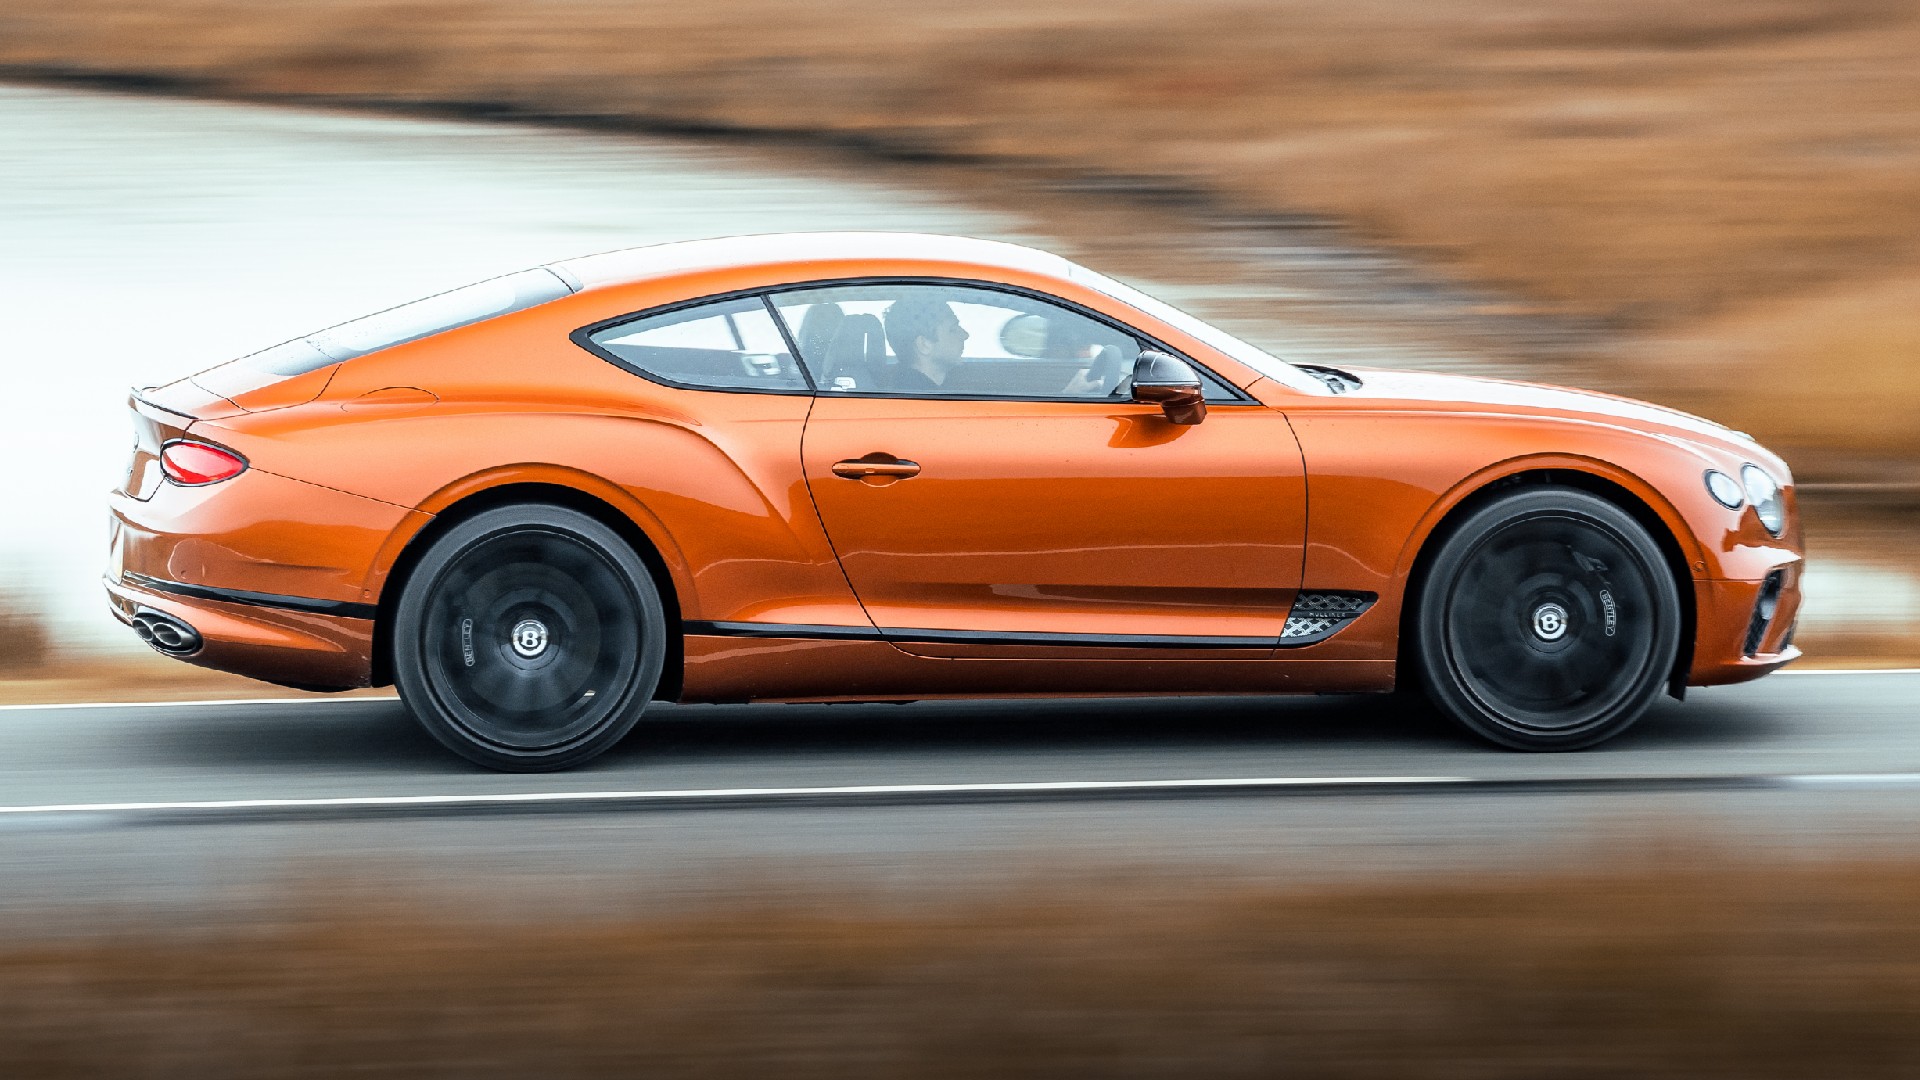 Bentley Updates Continental GT Mulliner Flagship With Speed’s Power And